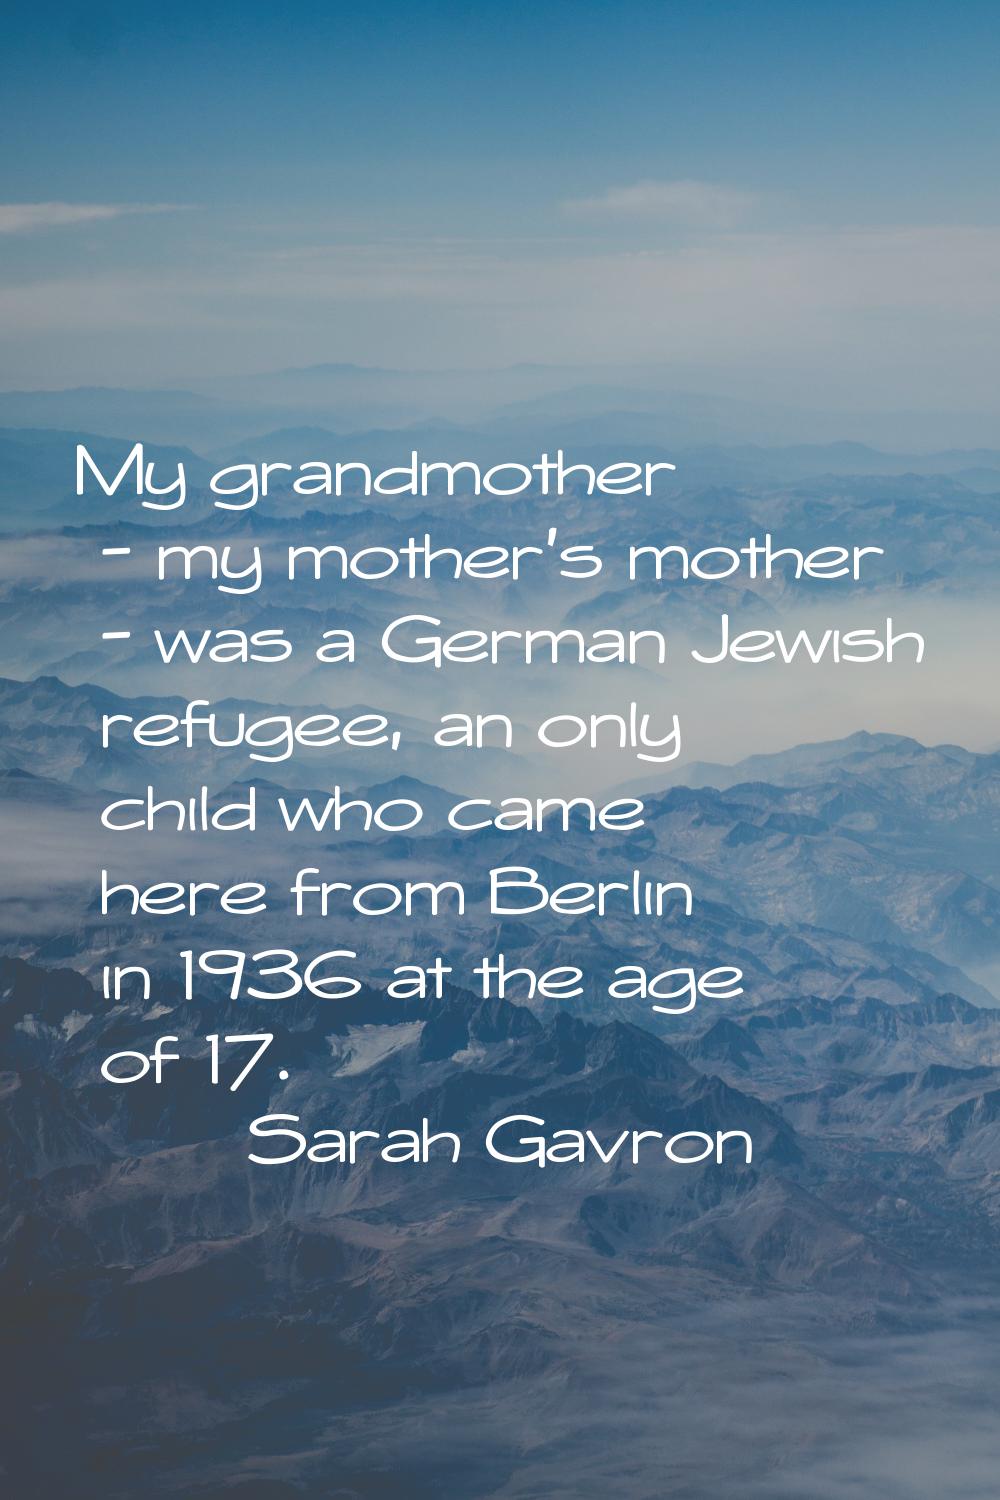 My grandmother - my mother's mother - was a German Jewish refugee, an only child who came here from